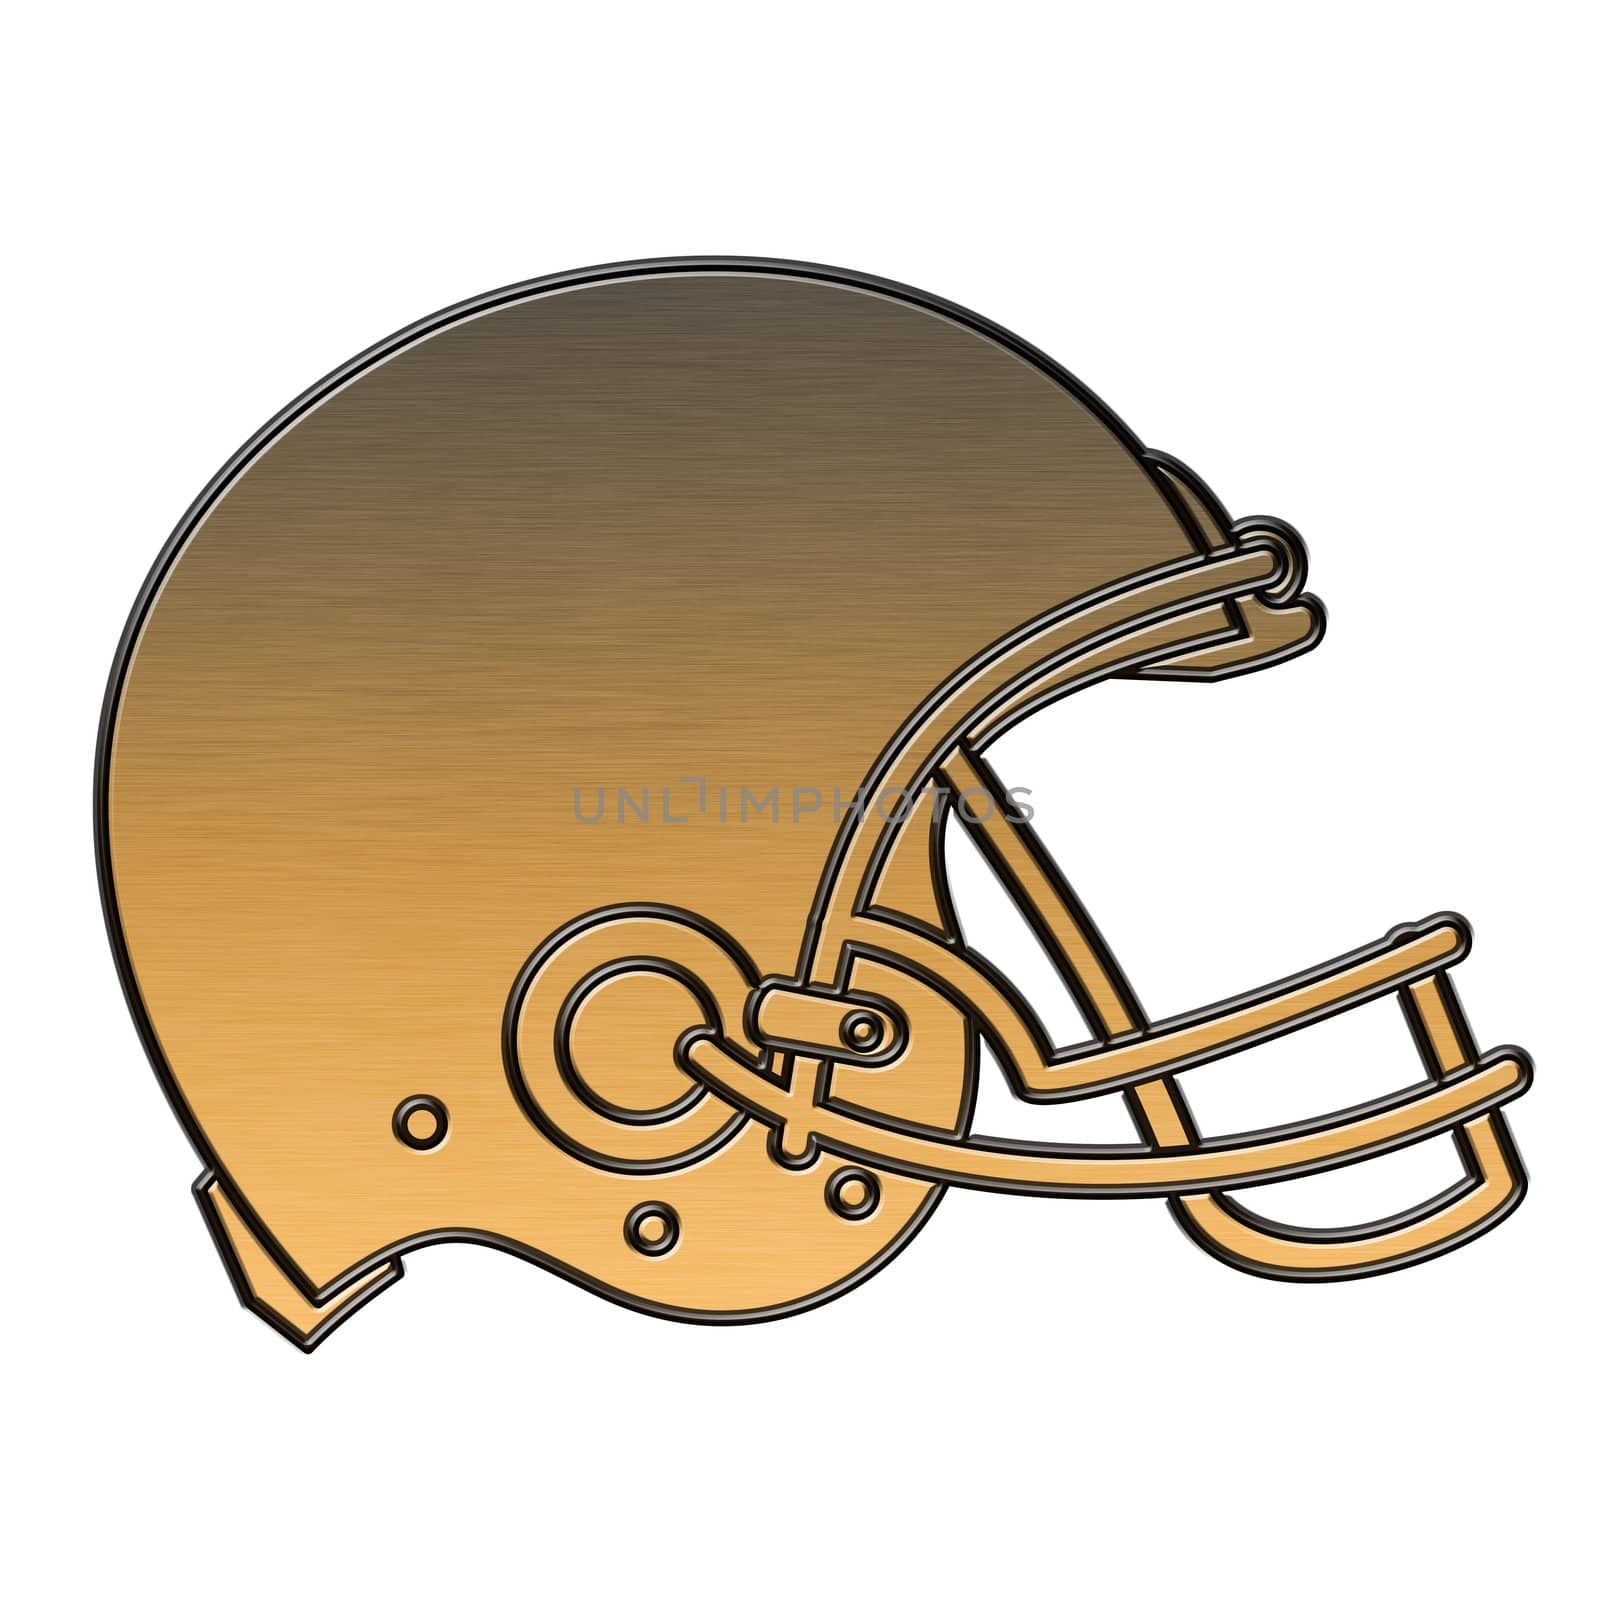 illustration of a golden american football helmet viewed from side done in metallic gold style on isolated white background.